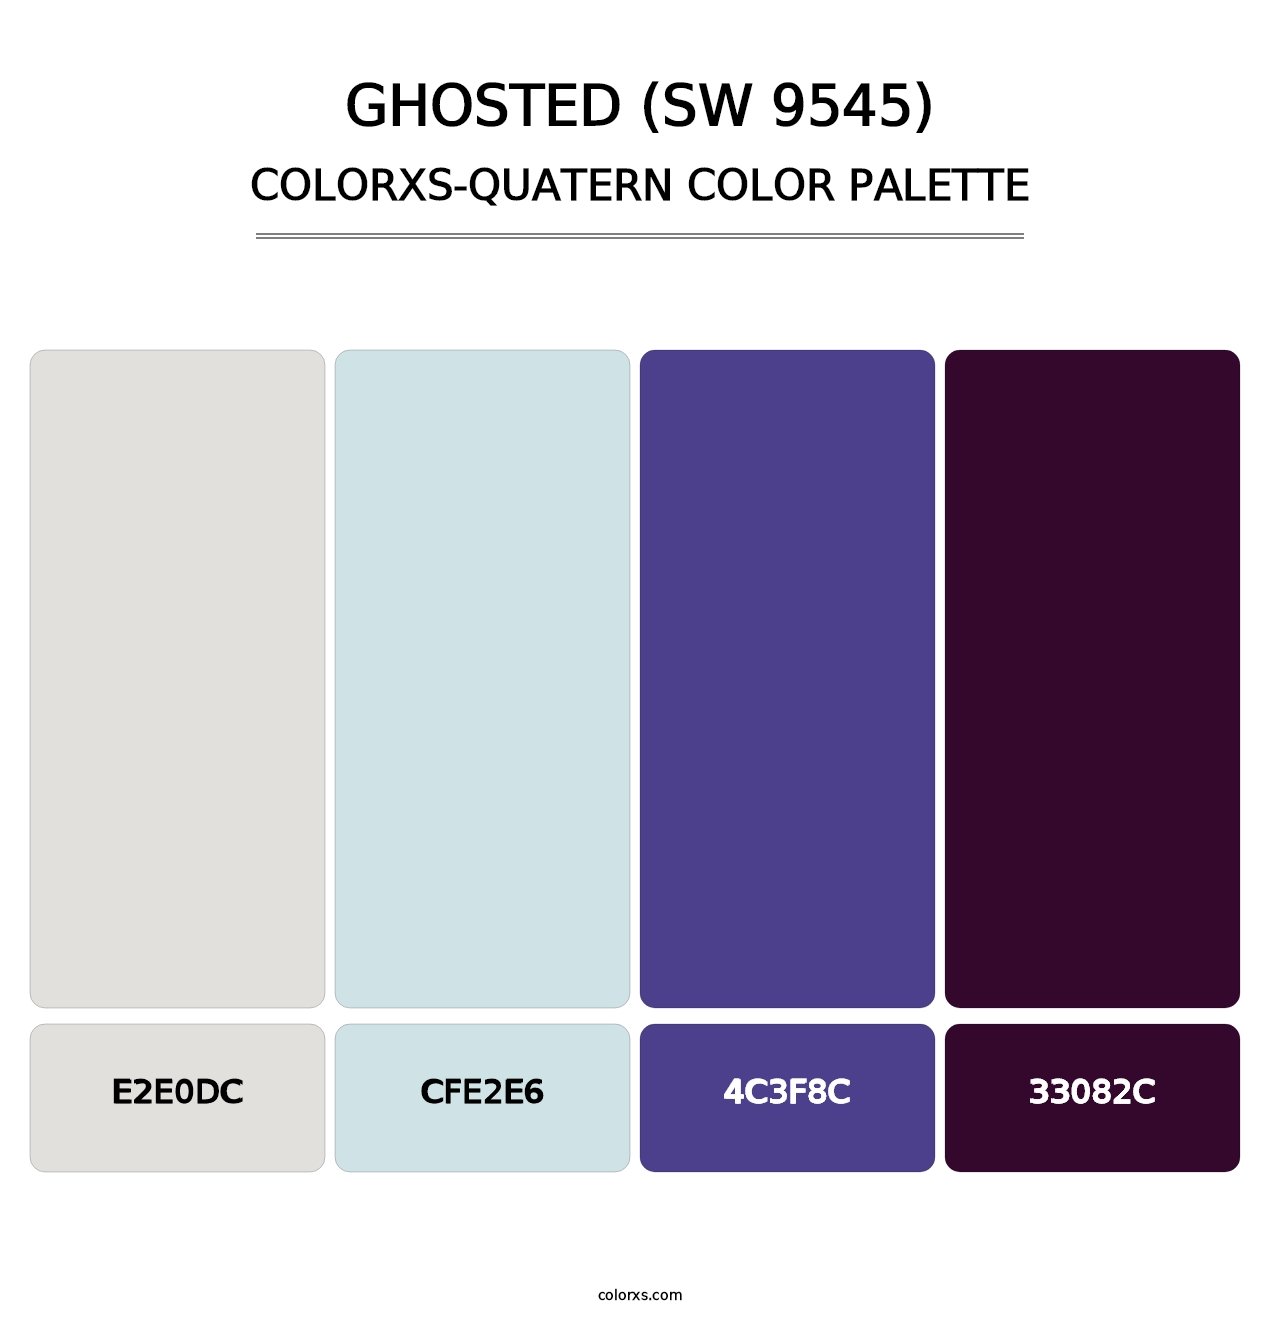 Ghosted (SW 9545) - Colorxs Quatern Palette